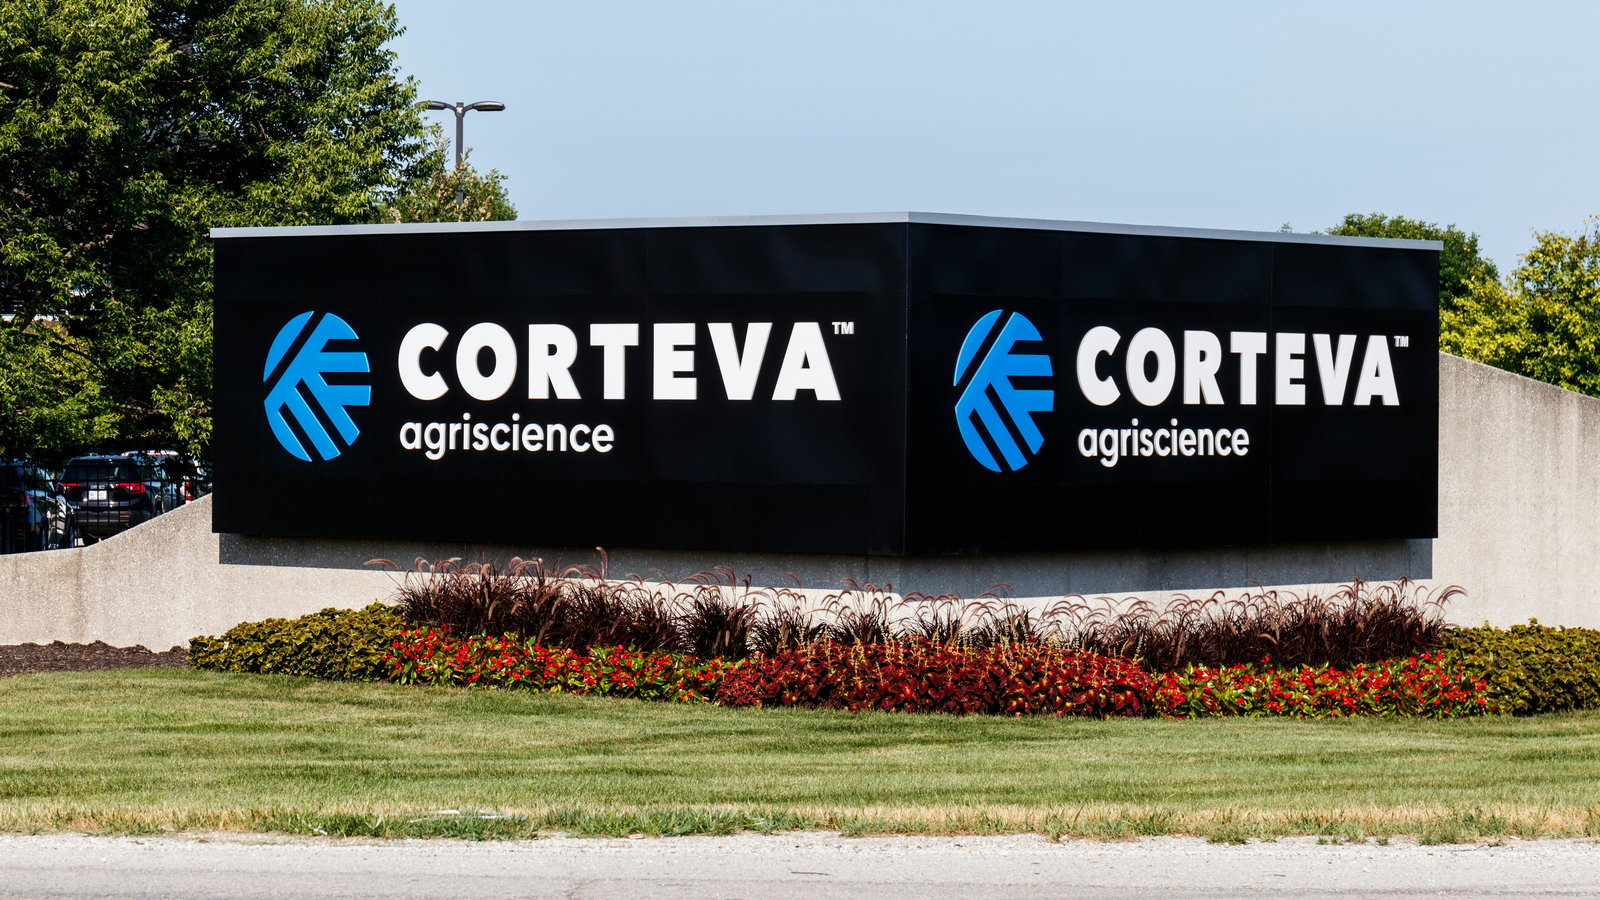 CTVA Stock: Corteva Is a Buy Should Shares Slip to $25 | InvestorPlace